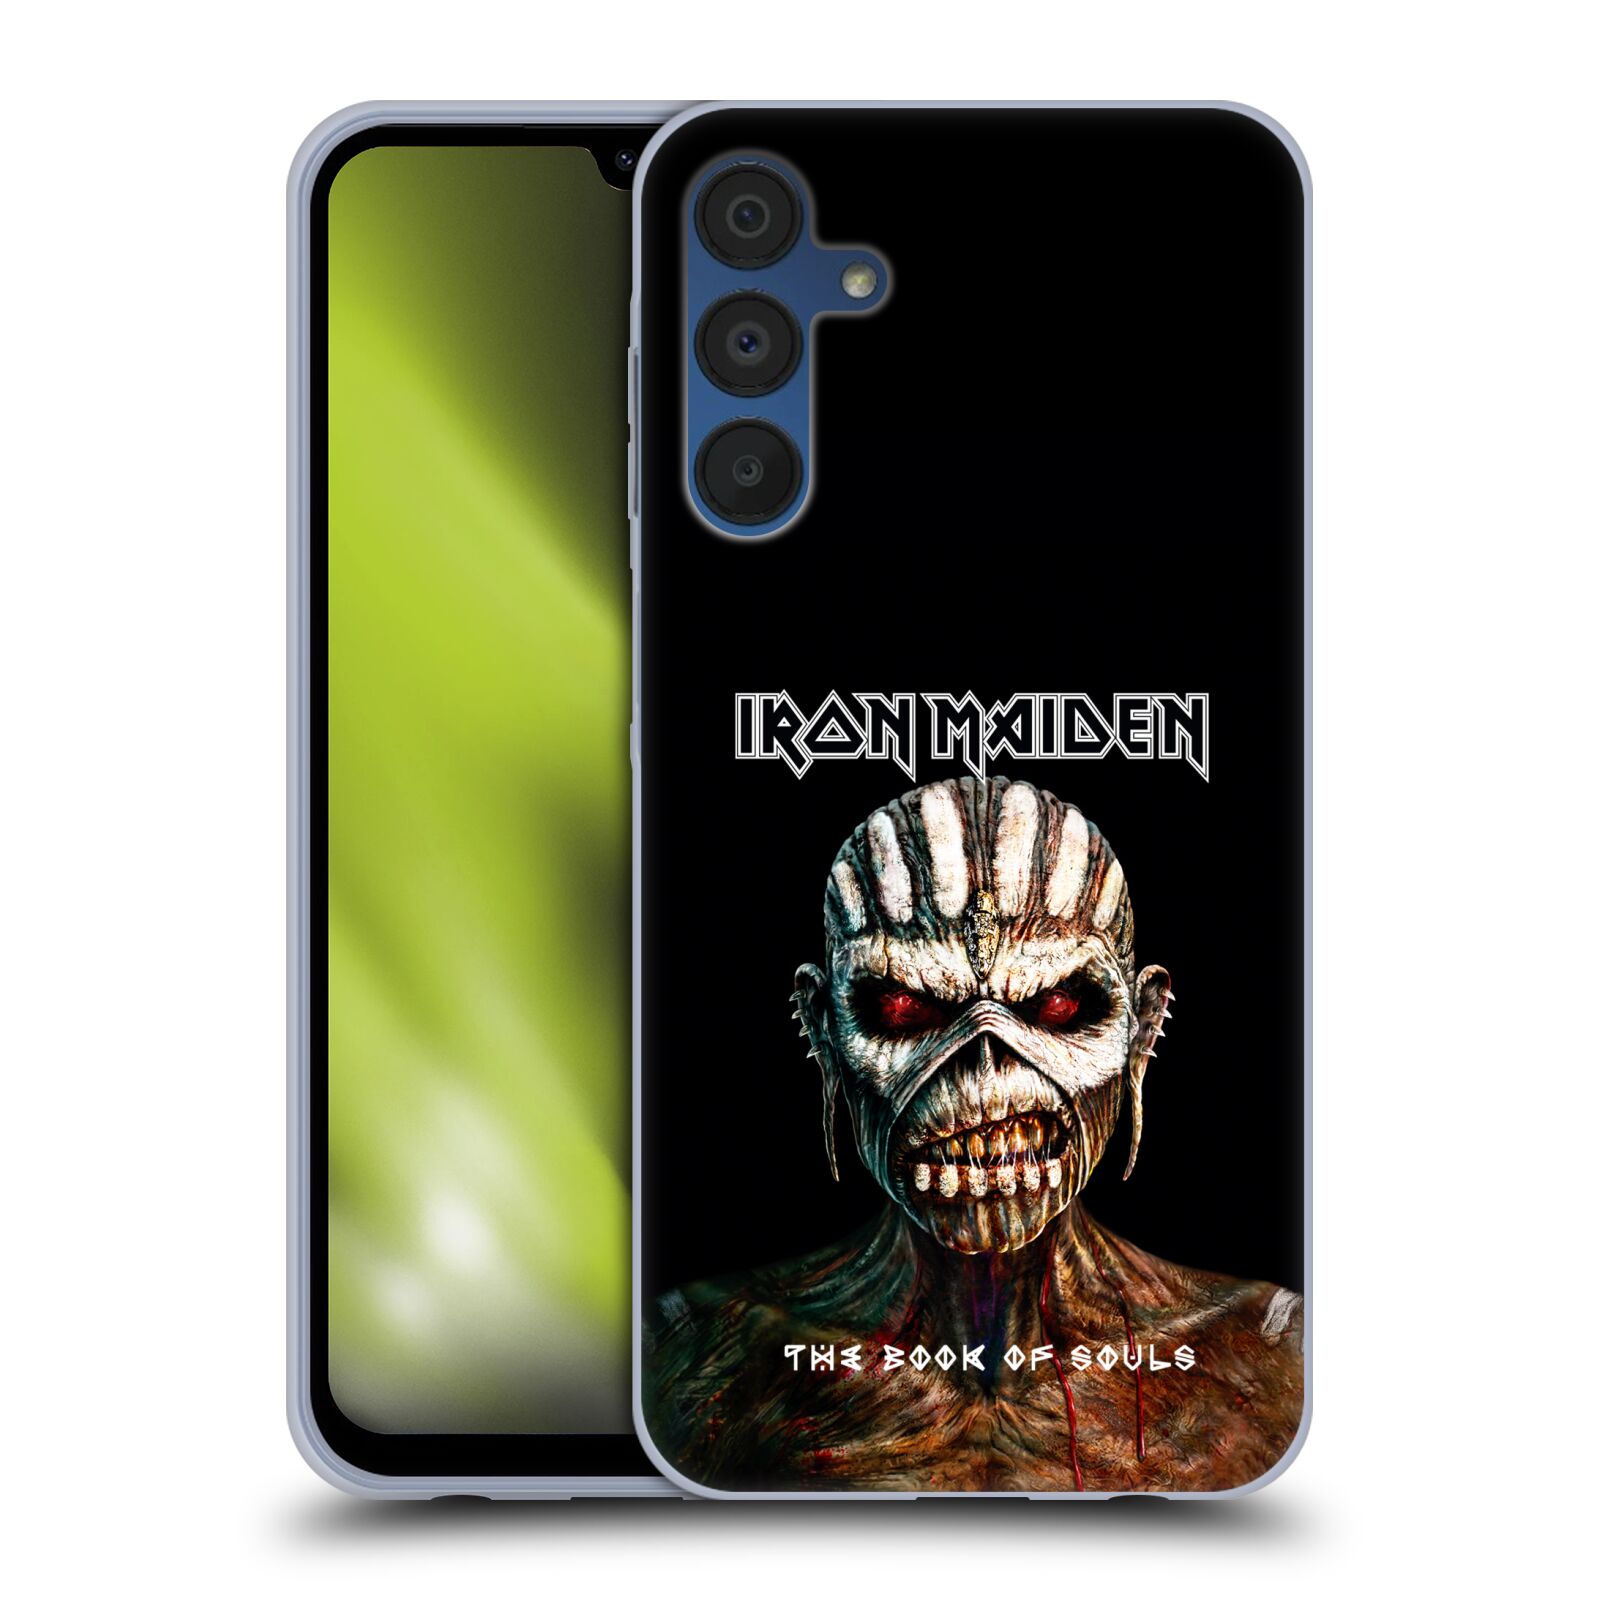 Silikonové pouzdro na mobil Samsung Galaxy A15 / A15 5G - Head Case - Iron Maiden - The Book Of Souls (Silikonový kryt, obal, pouzdro na mobilní telefon Samsung Galaxy A15 / A15 5G s motivem Iron Maiden - The Book Of Souls)